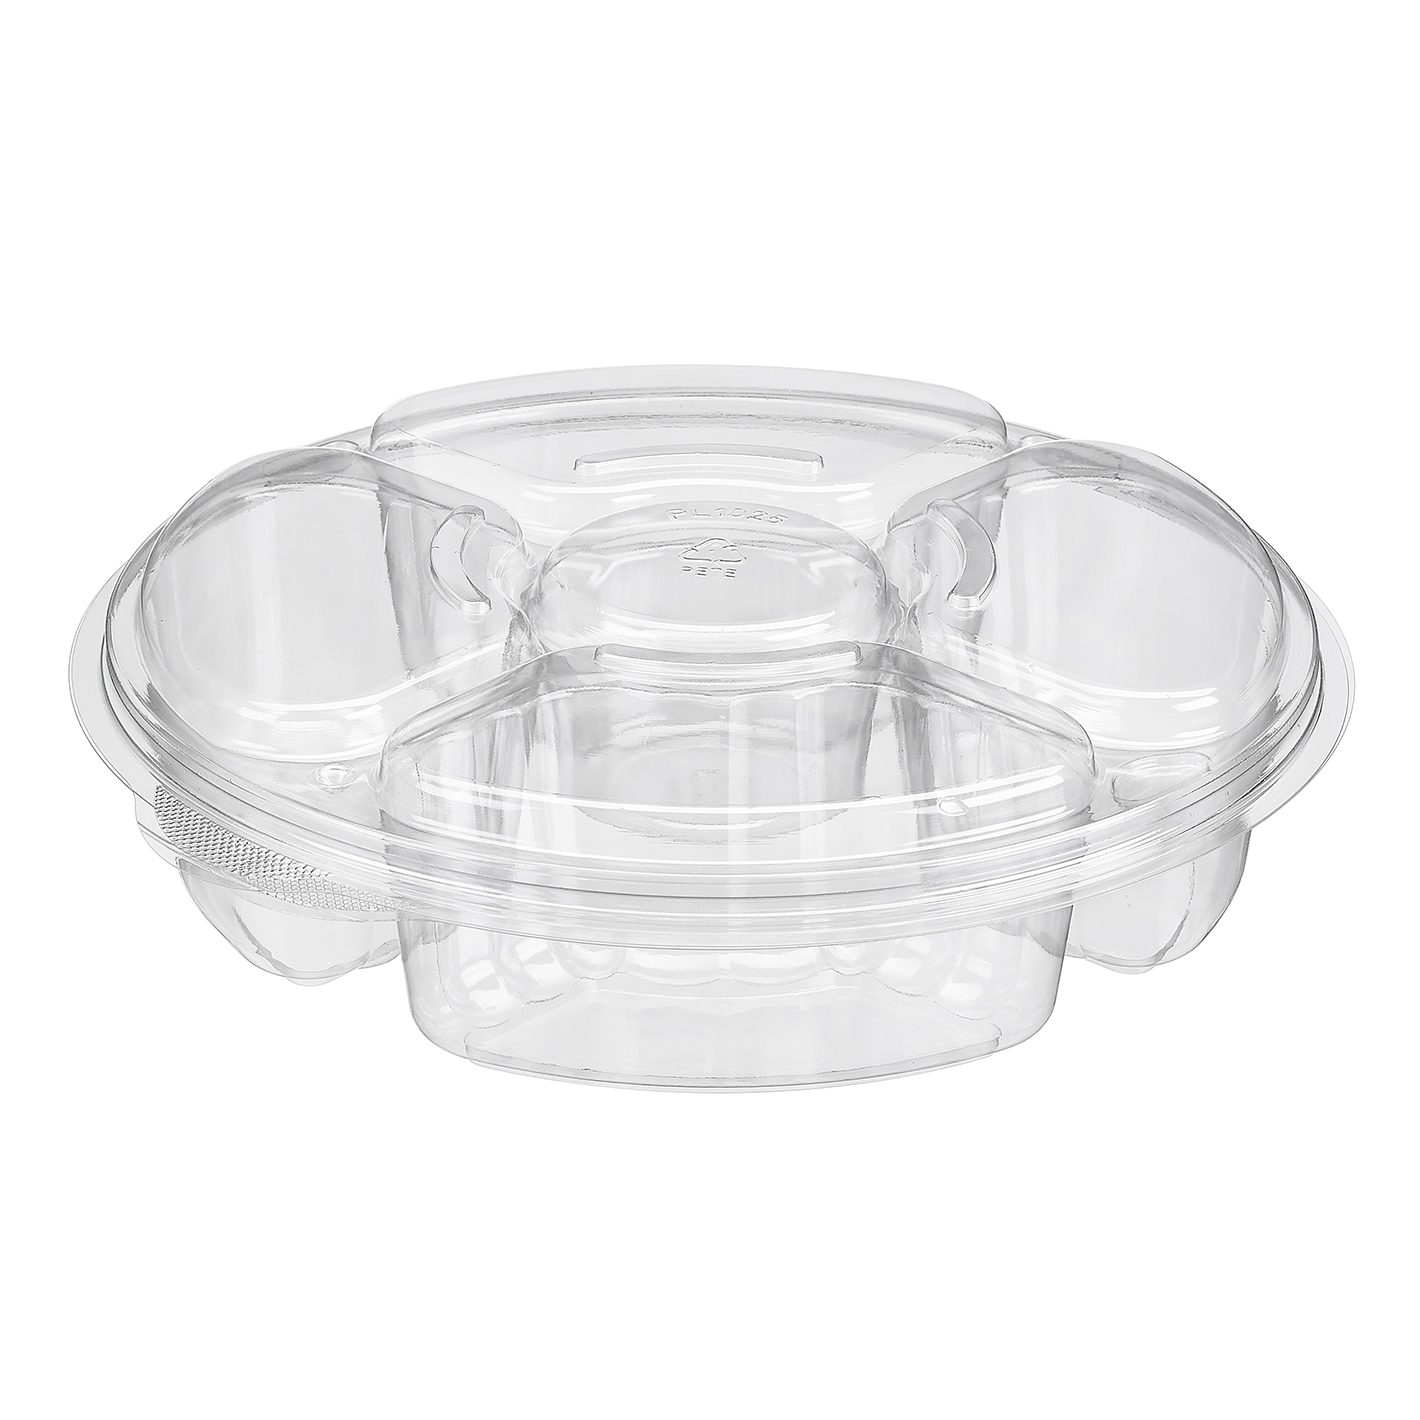 10&quot; PRODUCE TRAY INLINE
PLO54C 100/CASE  5 COMPART.
WITH DIP CUP  54 OZ.